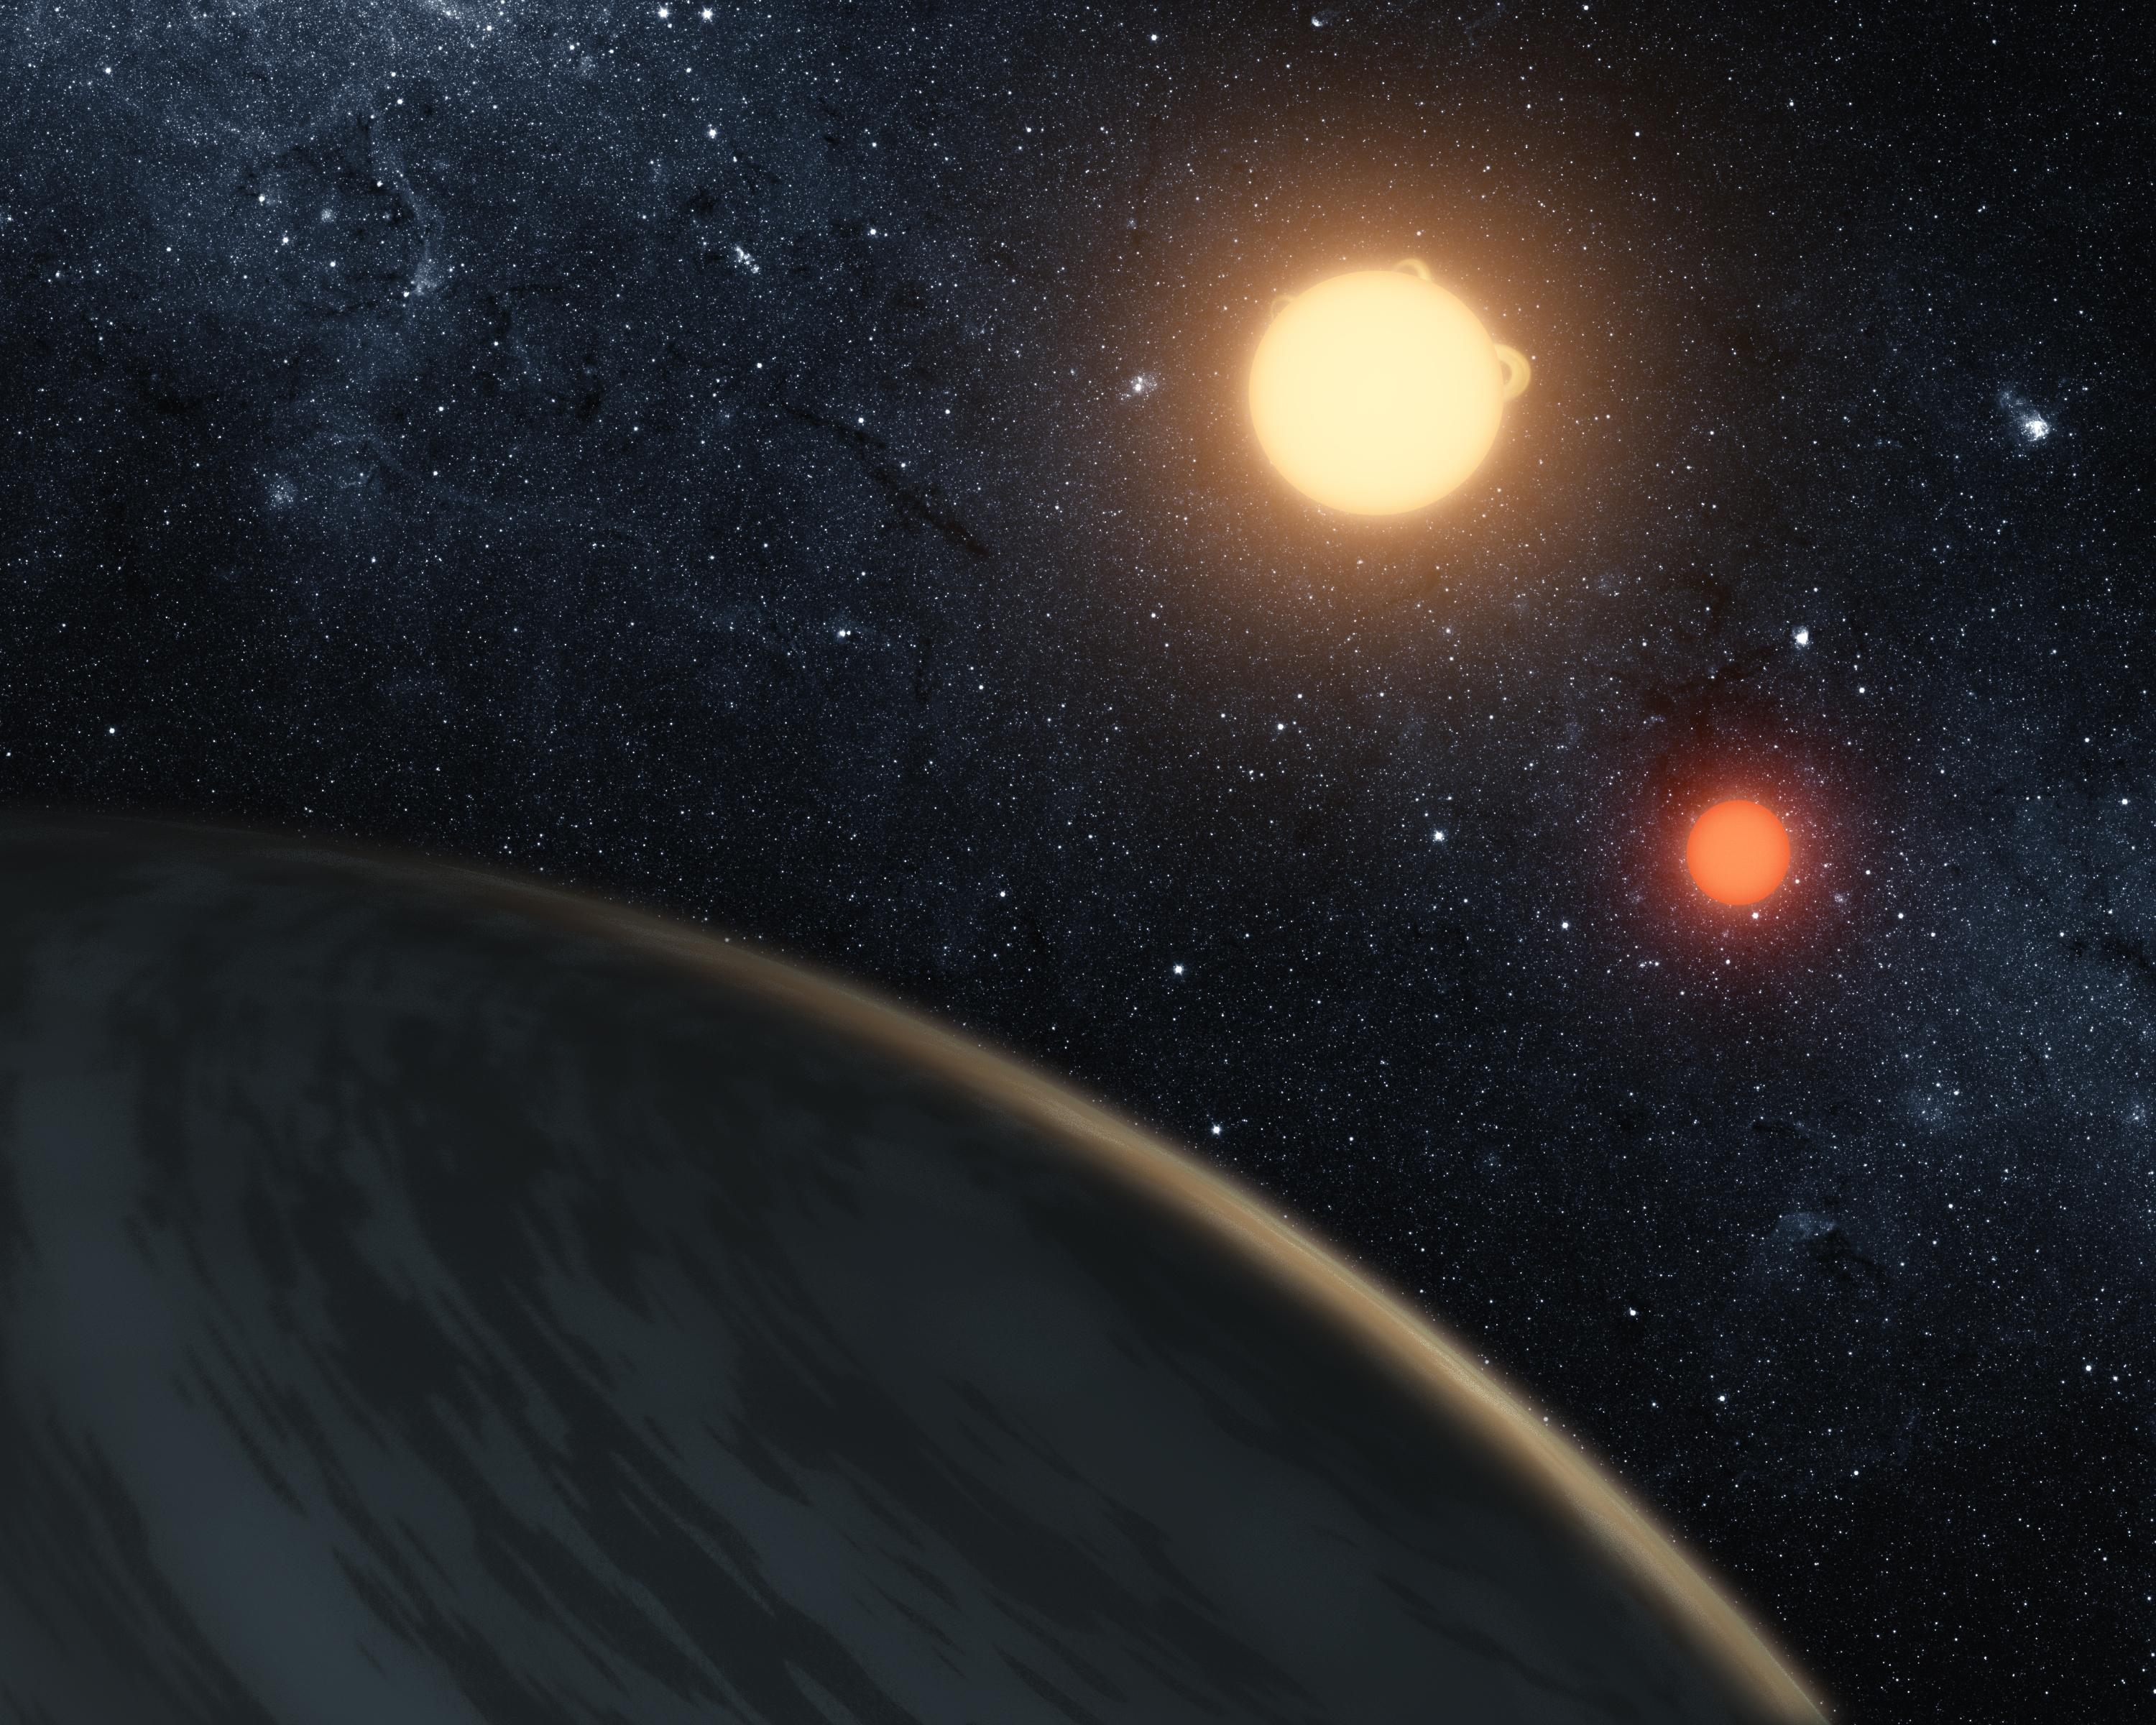 Artist’s concept of Kepler-16b – first planet around a double-star system – discovered using Nasa’s Kepler space telescope